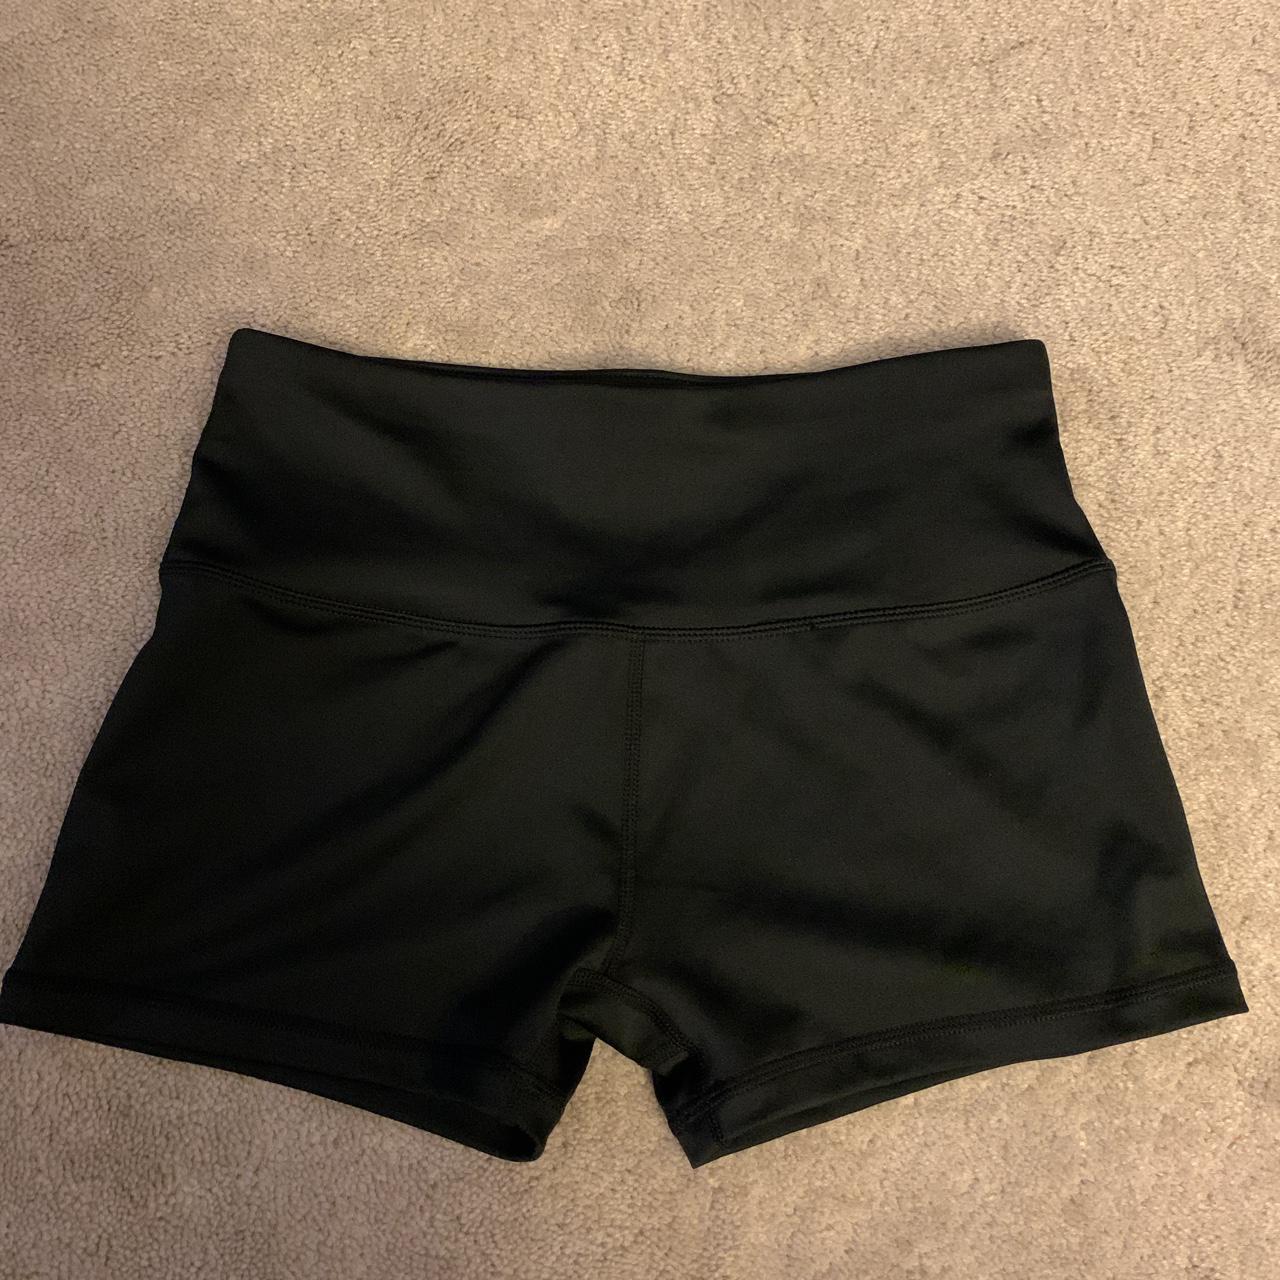 Small Black Amazon Stretchy Comfy Workout Shorts... - Depop